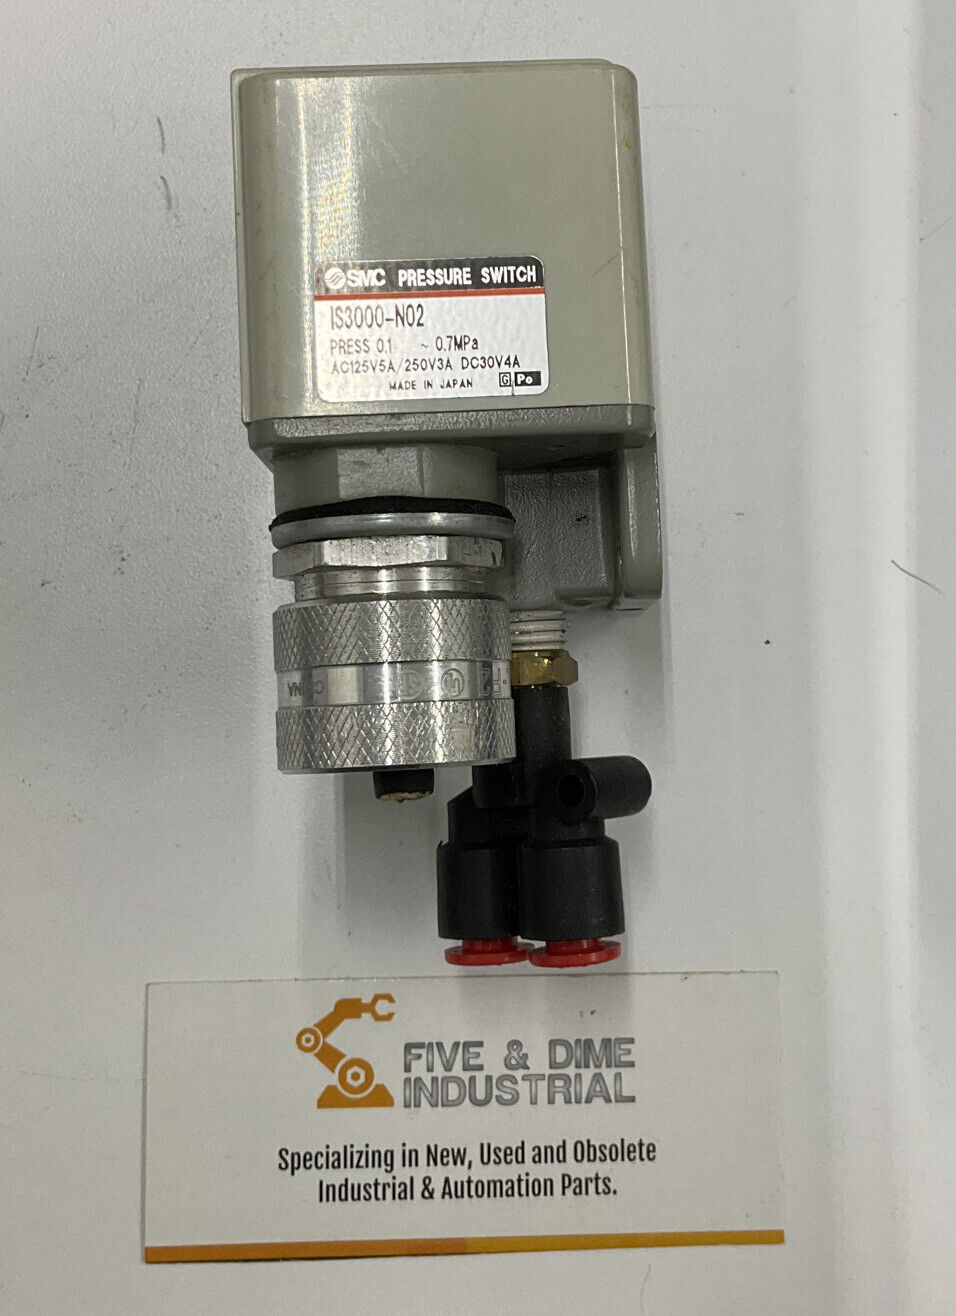 SMC PNEUMATIC PRESSURE SWITCH IS3000-N02  (RE100)